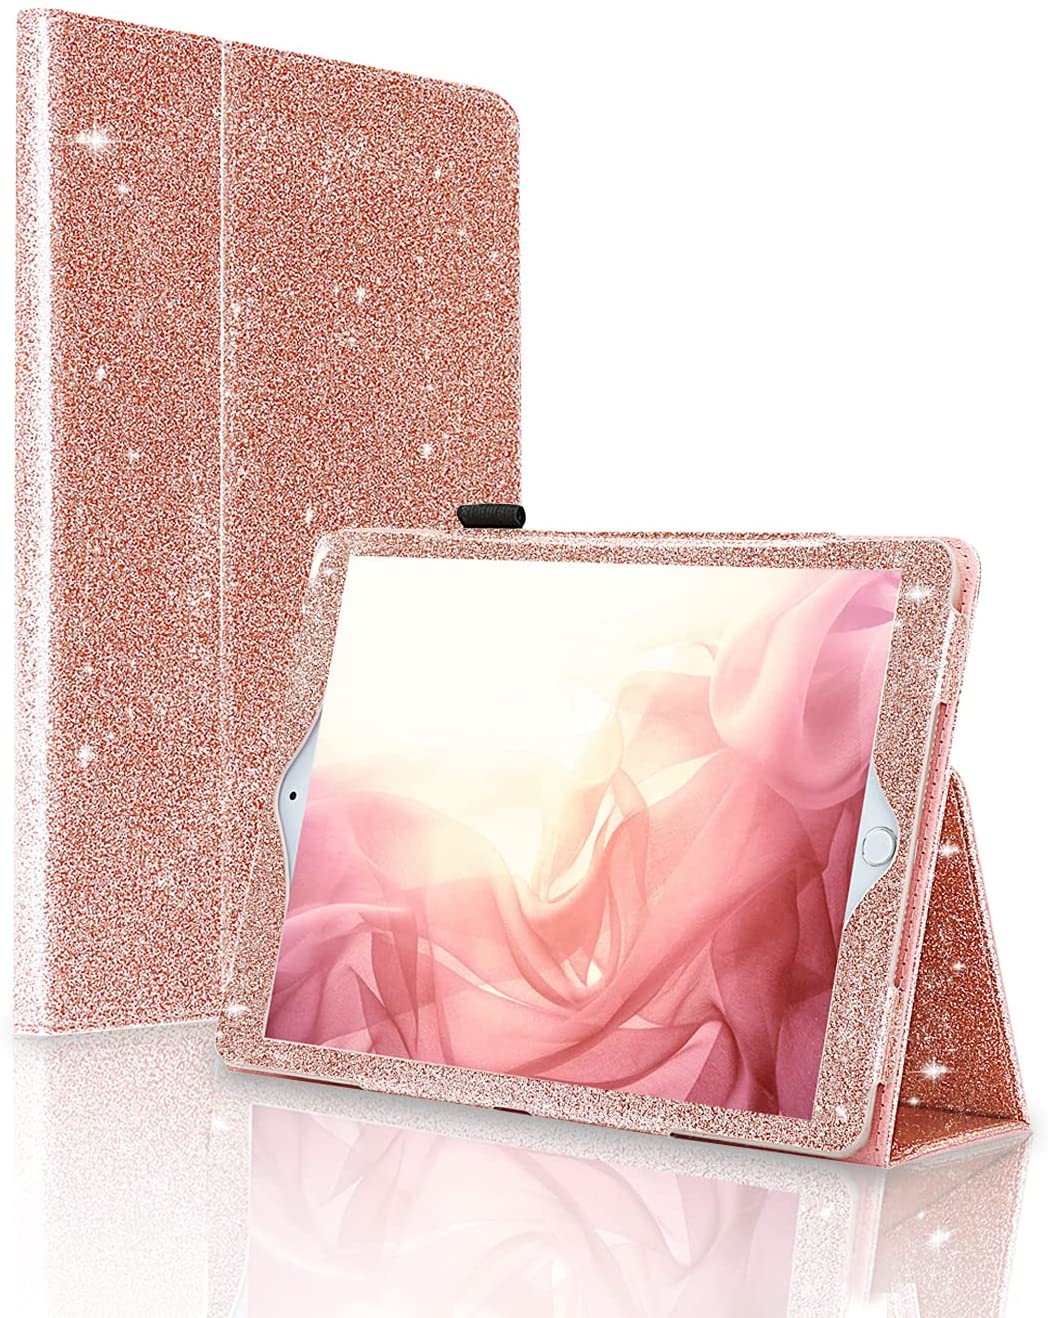 iPad 7.9 inch, Glitter with Magnetic Closure Cover for iPad Mini 4/5